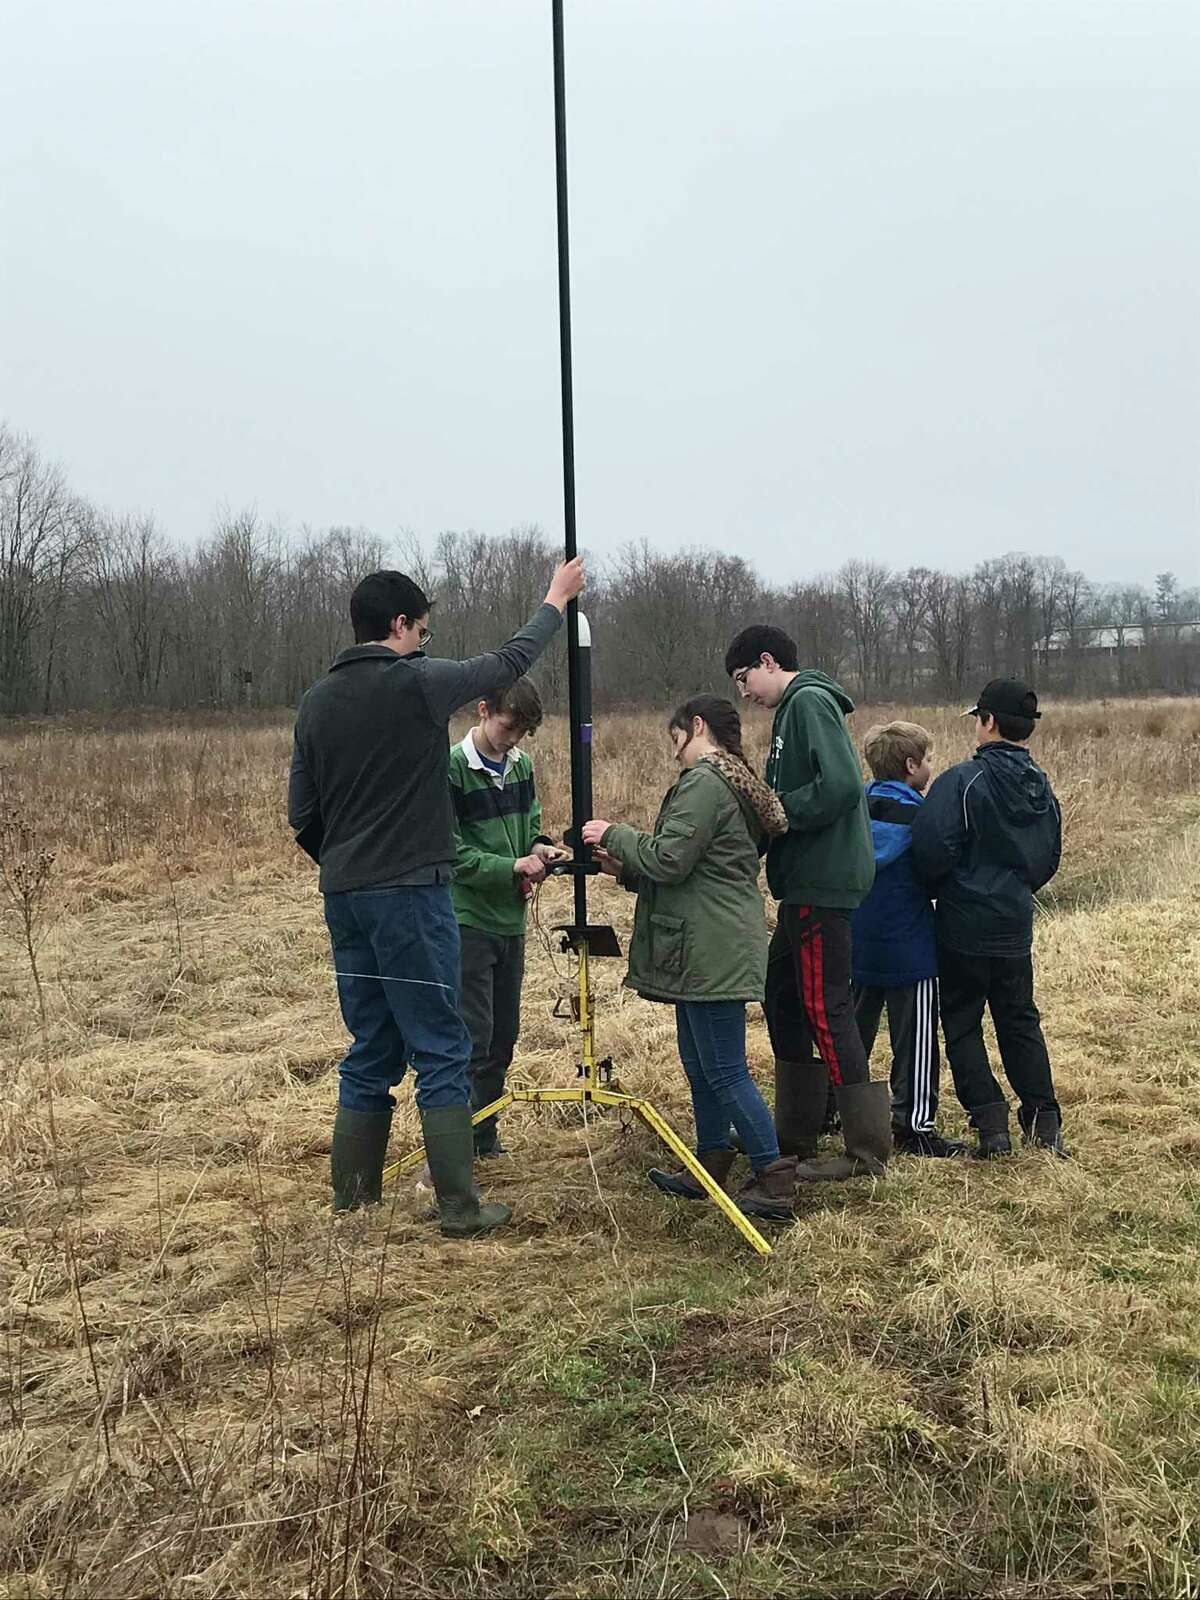 The rocketry team putting the rocket on the launch pad and getting it ready for launch at one of the practice flights in Durham. From left, Peter Sebestyen, Damien Seidman, Amelia Lekovic, John Paul Sebestyen, Brian Daniels, Adam Wilder. Not pictured; Adriel Lekovic.